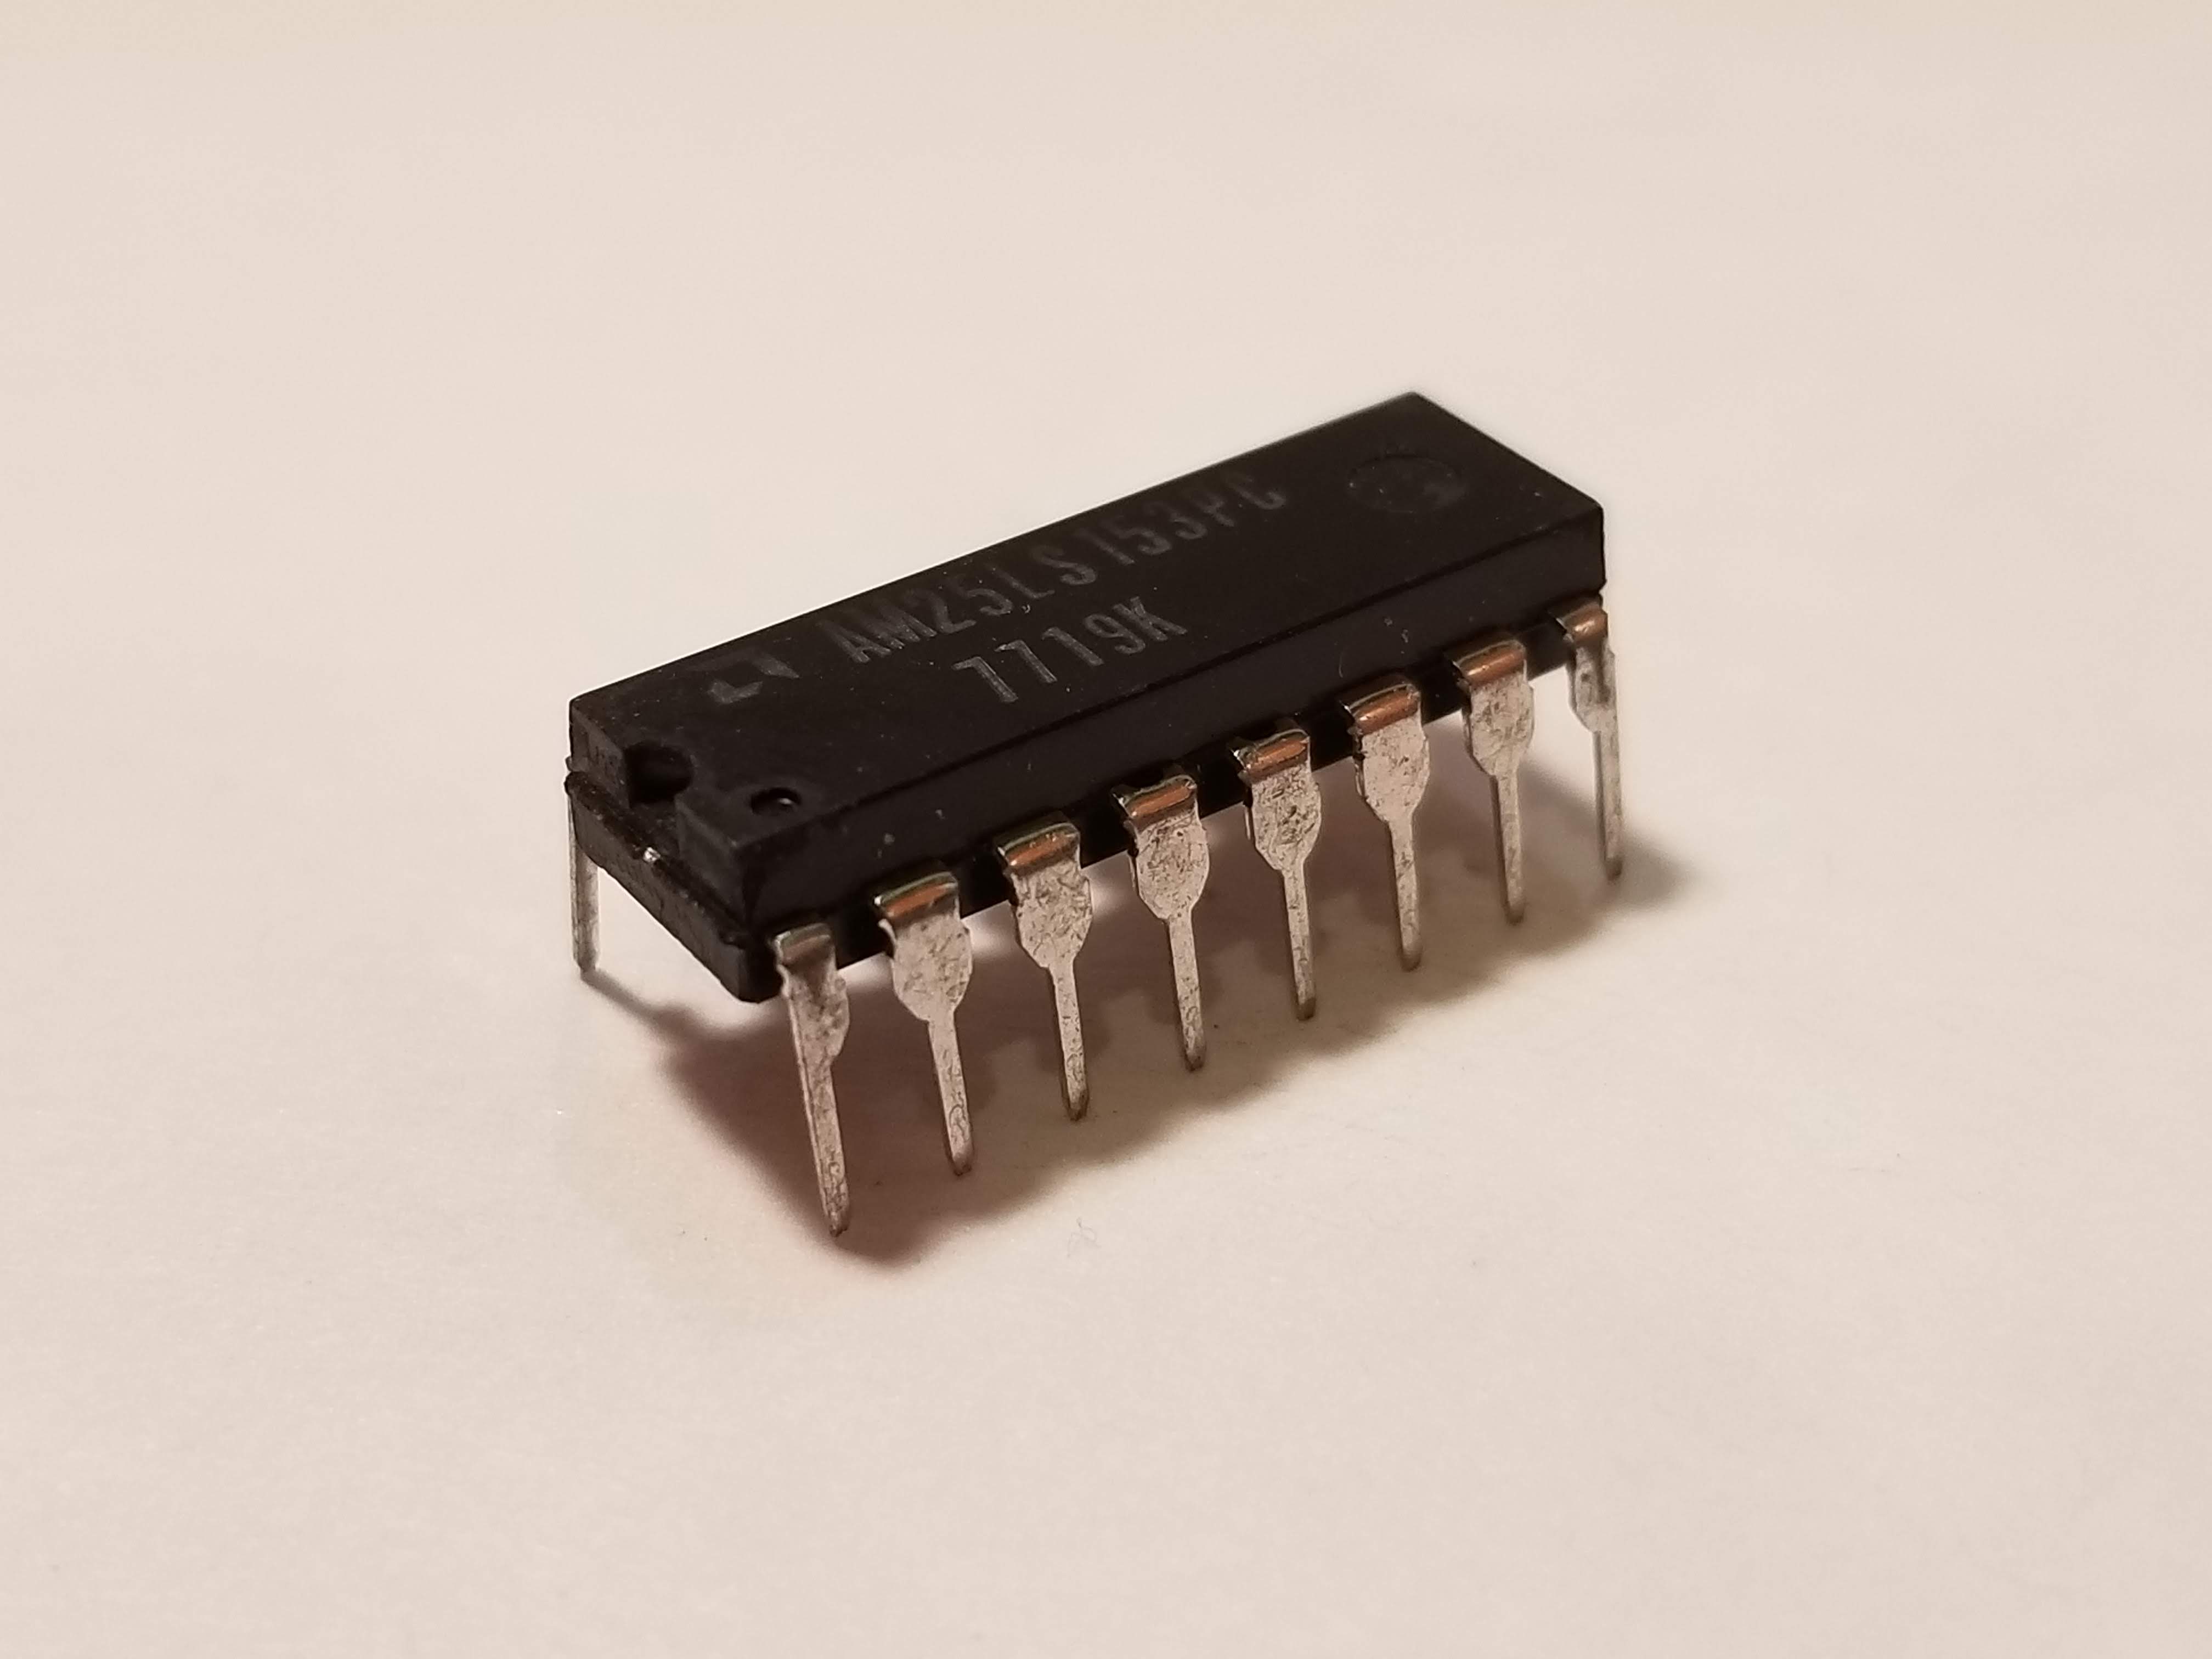 Picture of 74153 Dual 4-to-1 Multiplexer